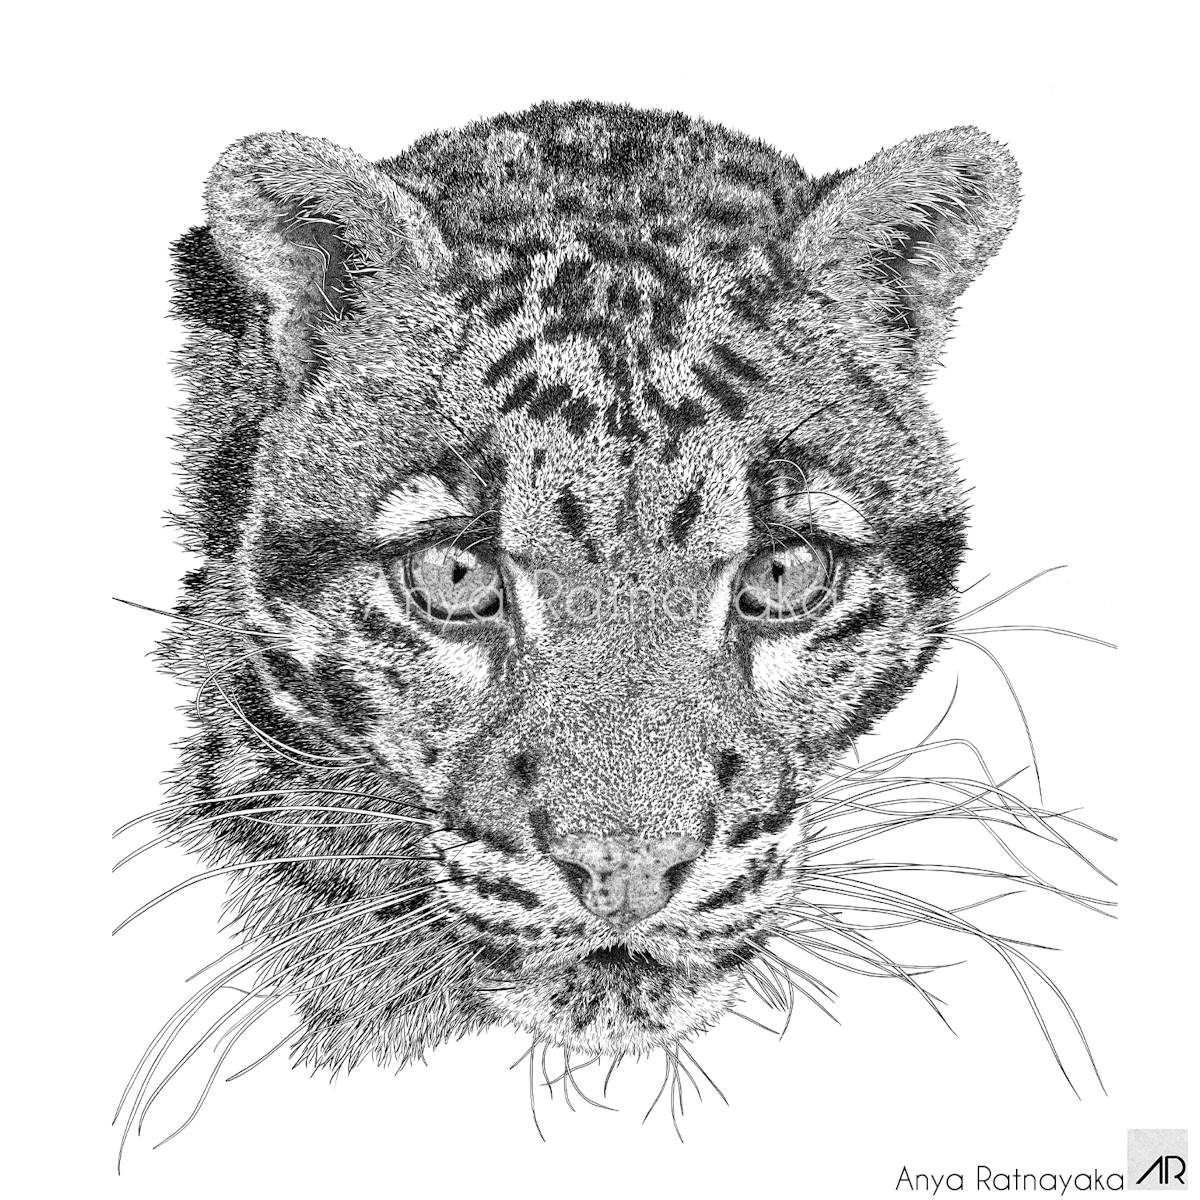 Anya's drawing of a Clouded-Leopard Nebulous